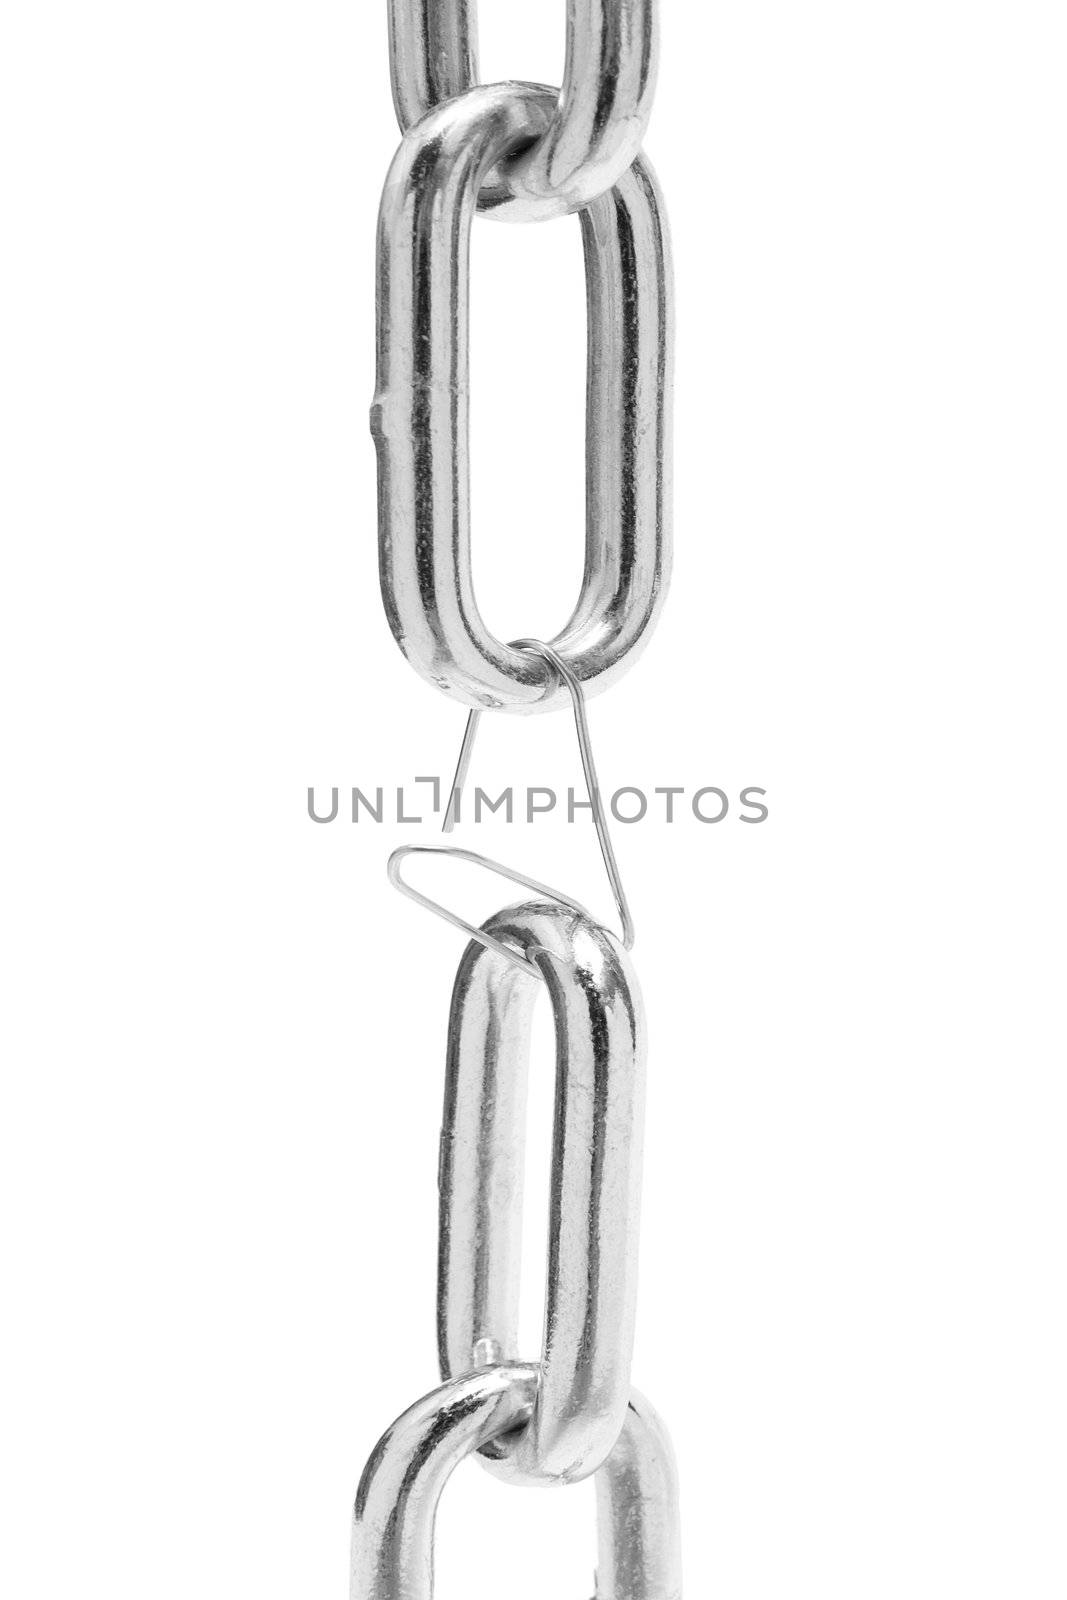 Chain links held by a paper clip. Isolated on a white background.